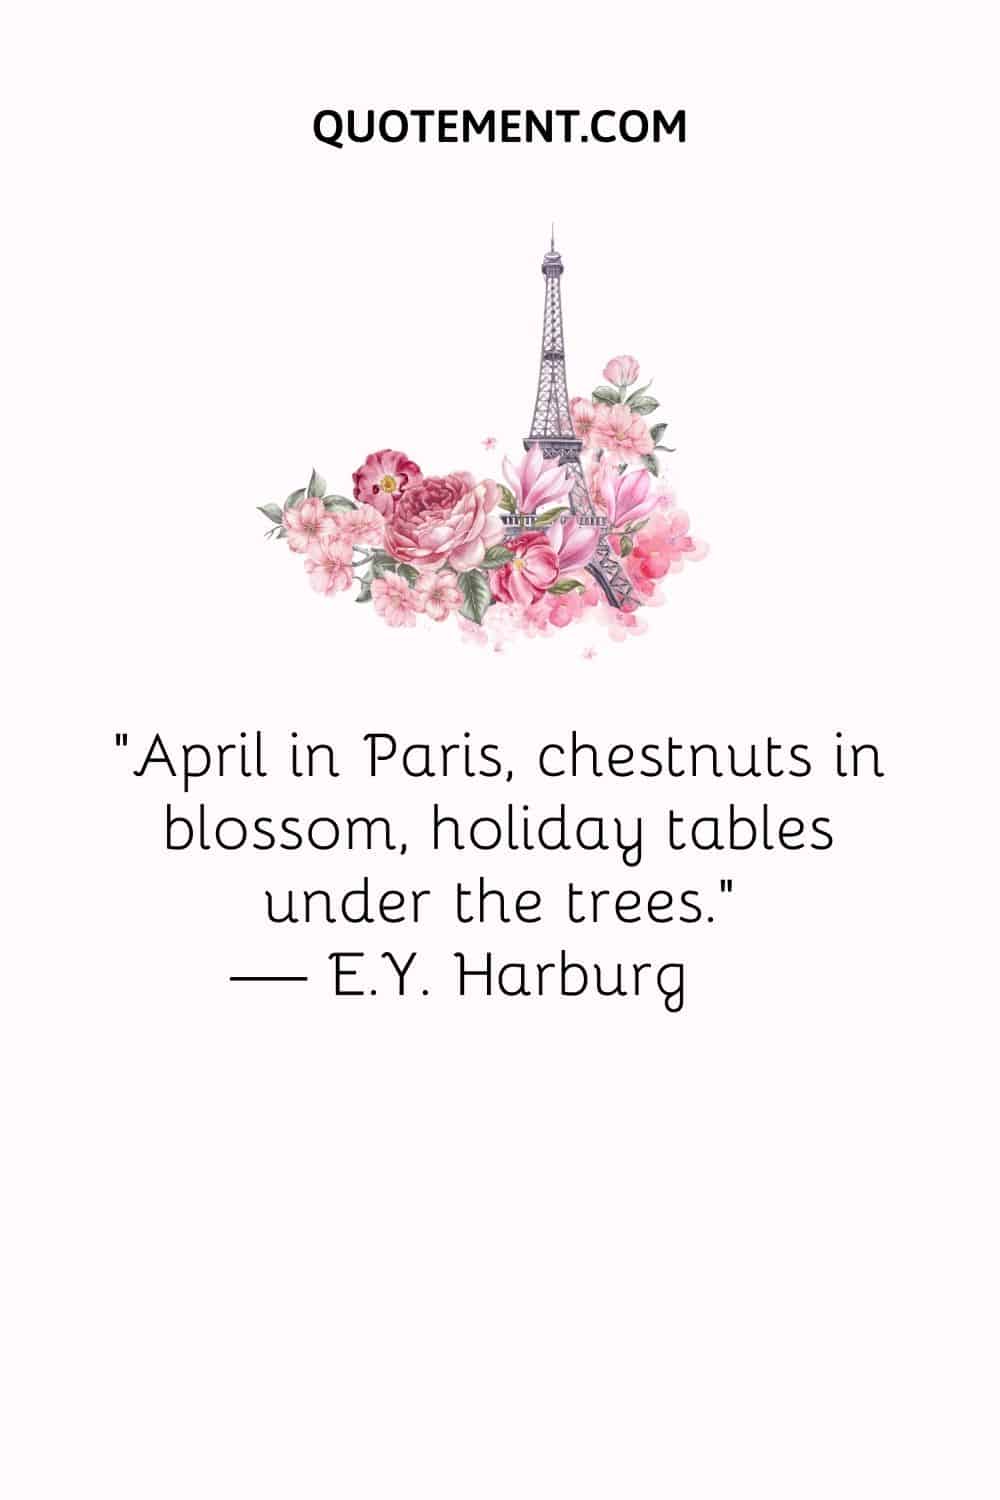 Eiffel tower and flowers image representing sweet quote for April